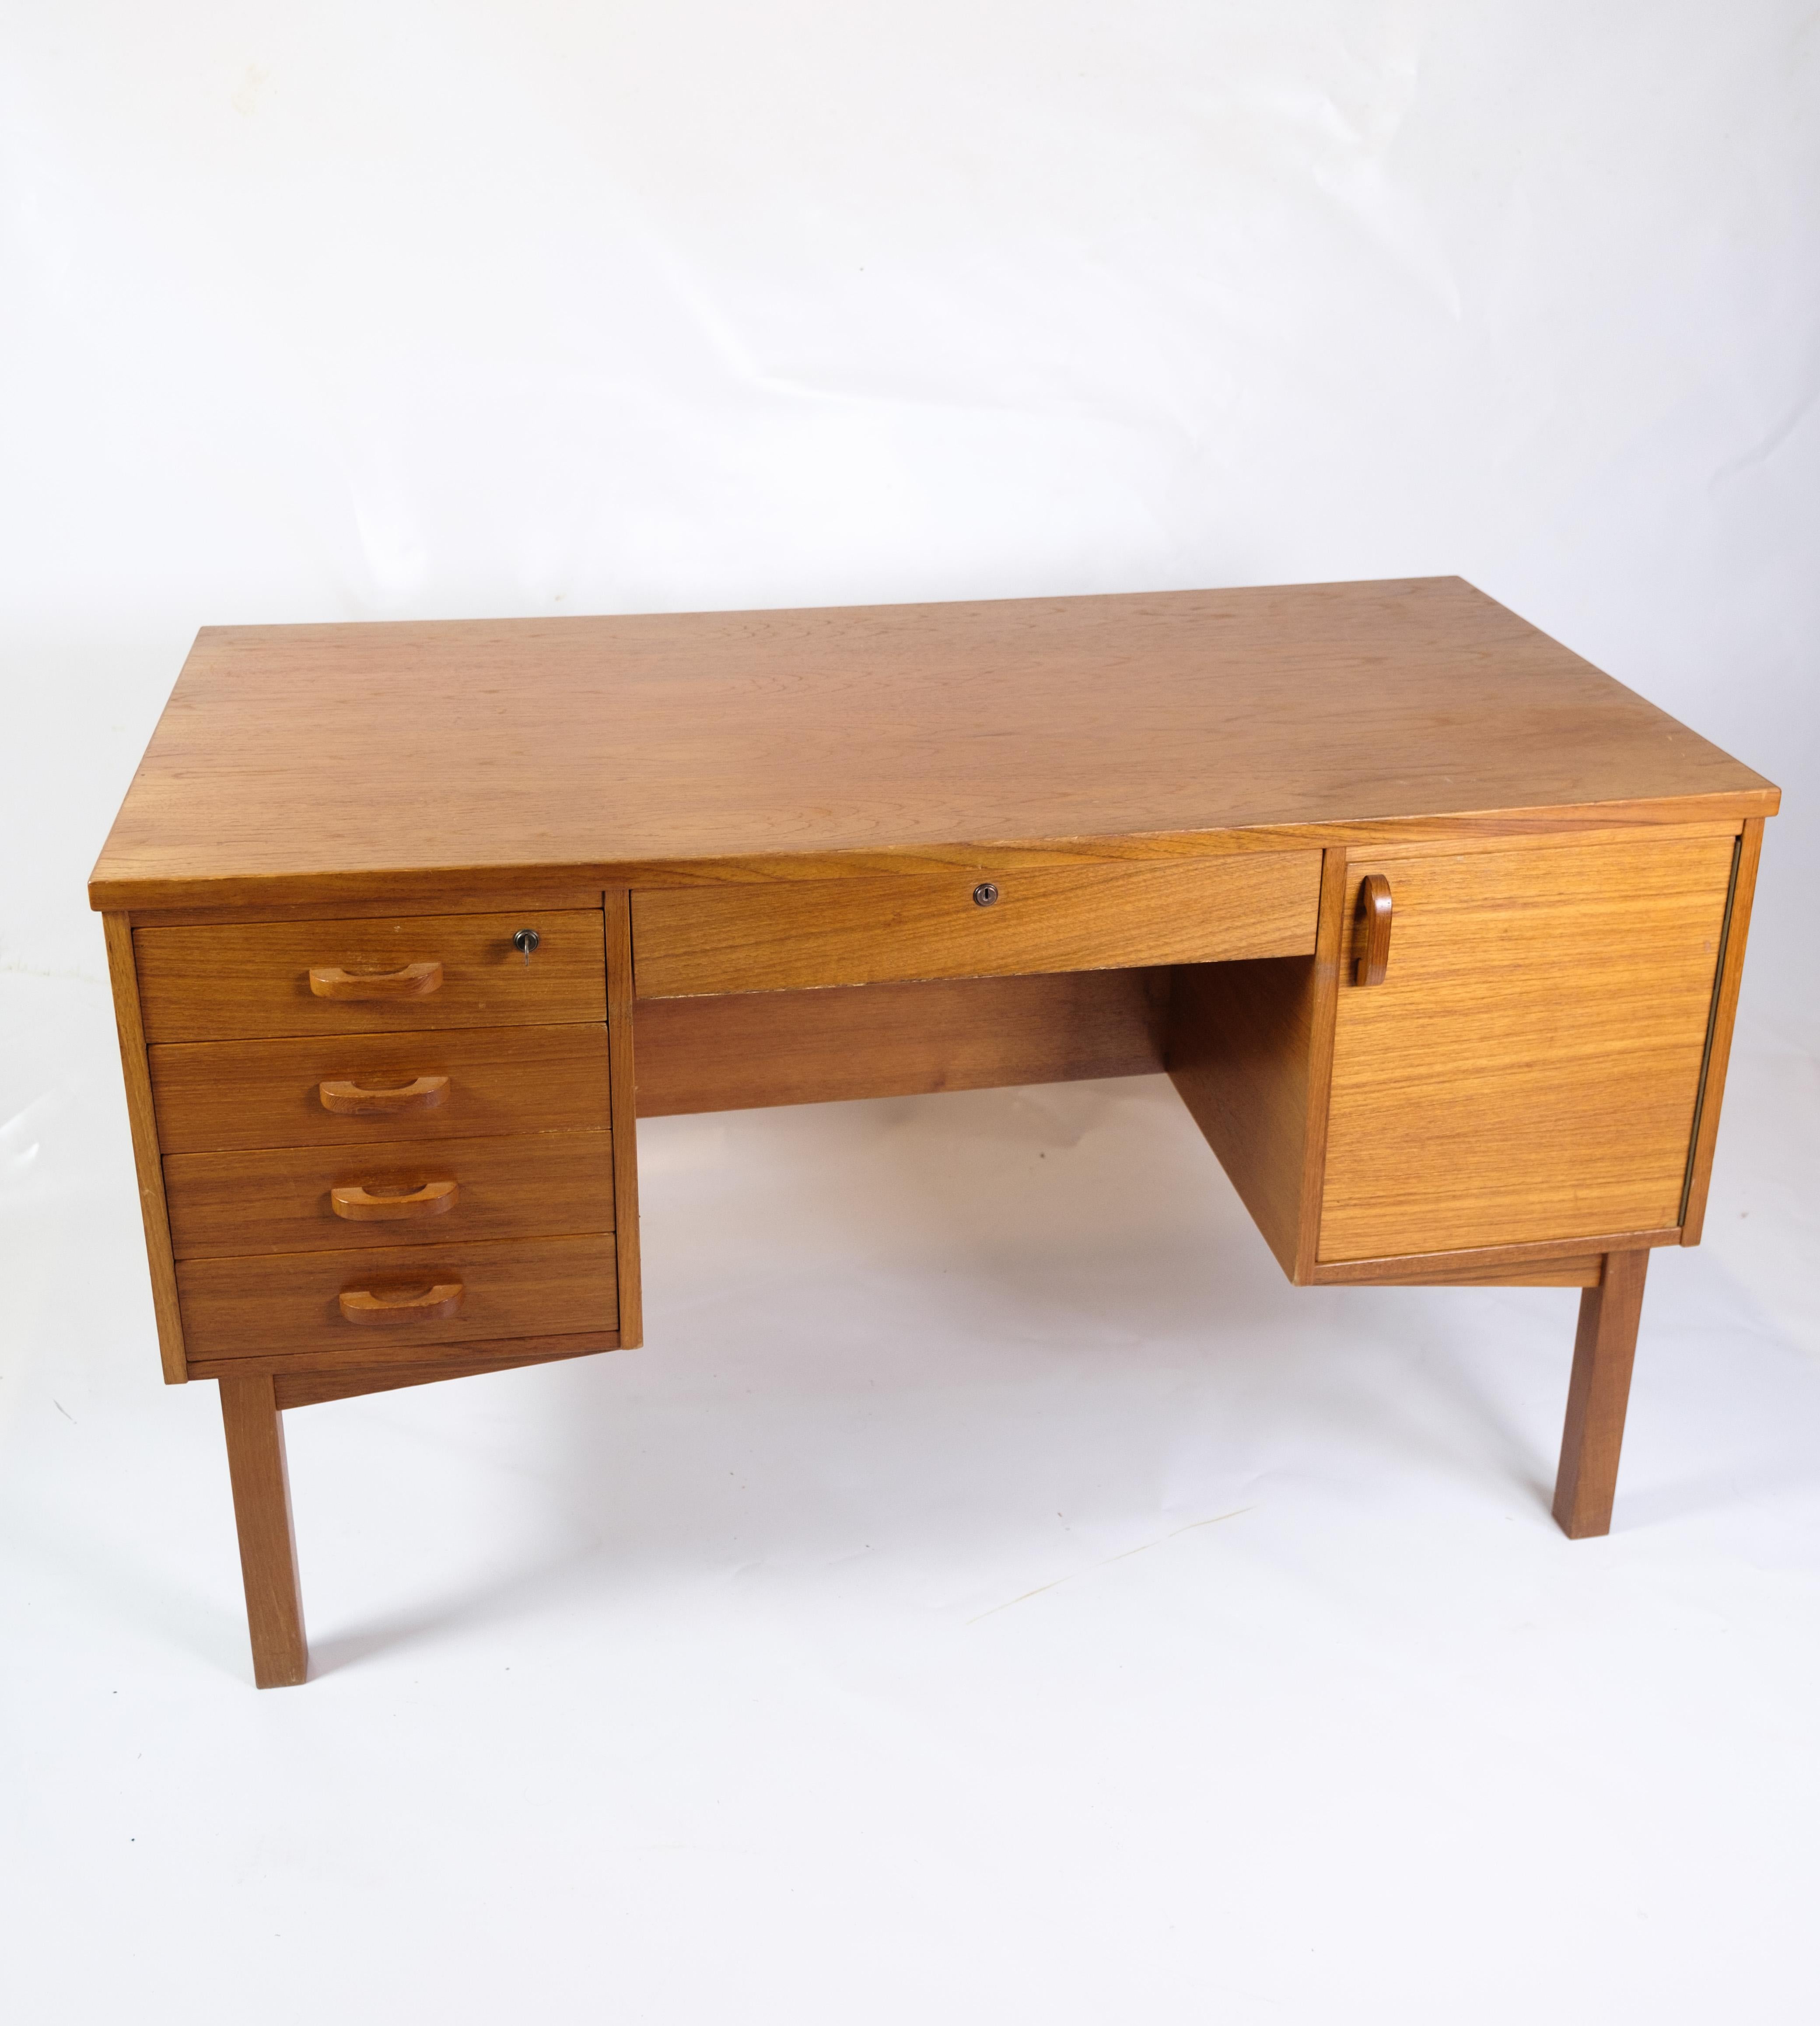 This desk is a beautiful example of Danish design from the 1960s. Made of teak wood, it exudes a warm and welcoming atmosphere that fits perfectly with any decor. The desk's simple yet elegant design makes it a timeless piece that never goes out of